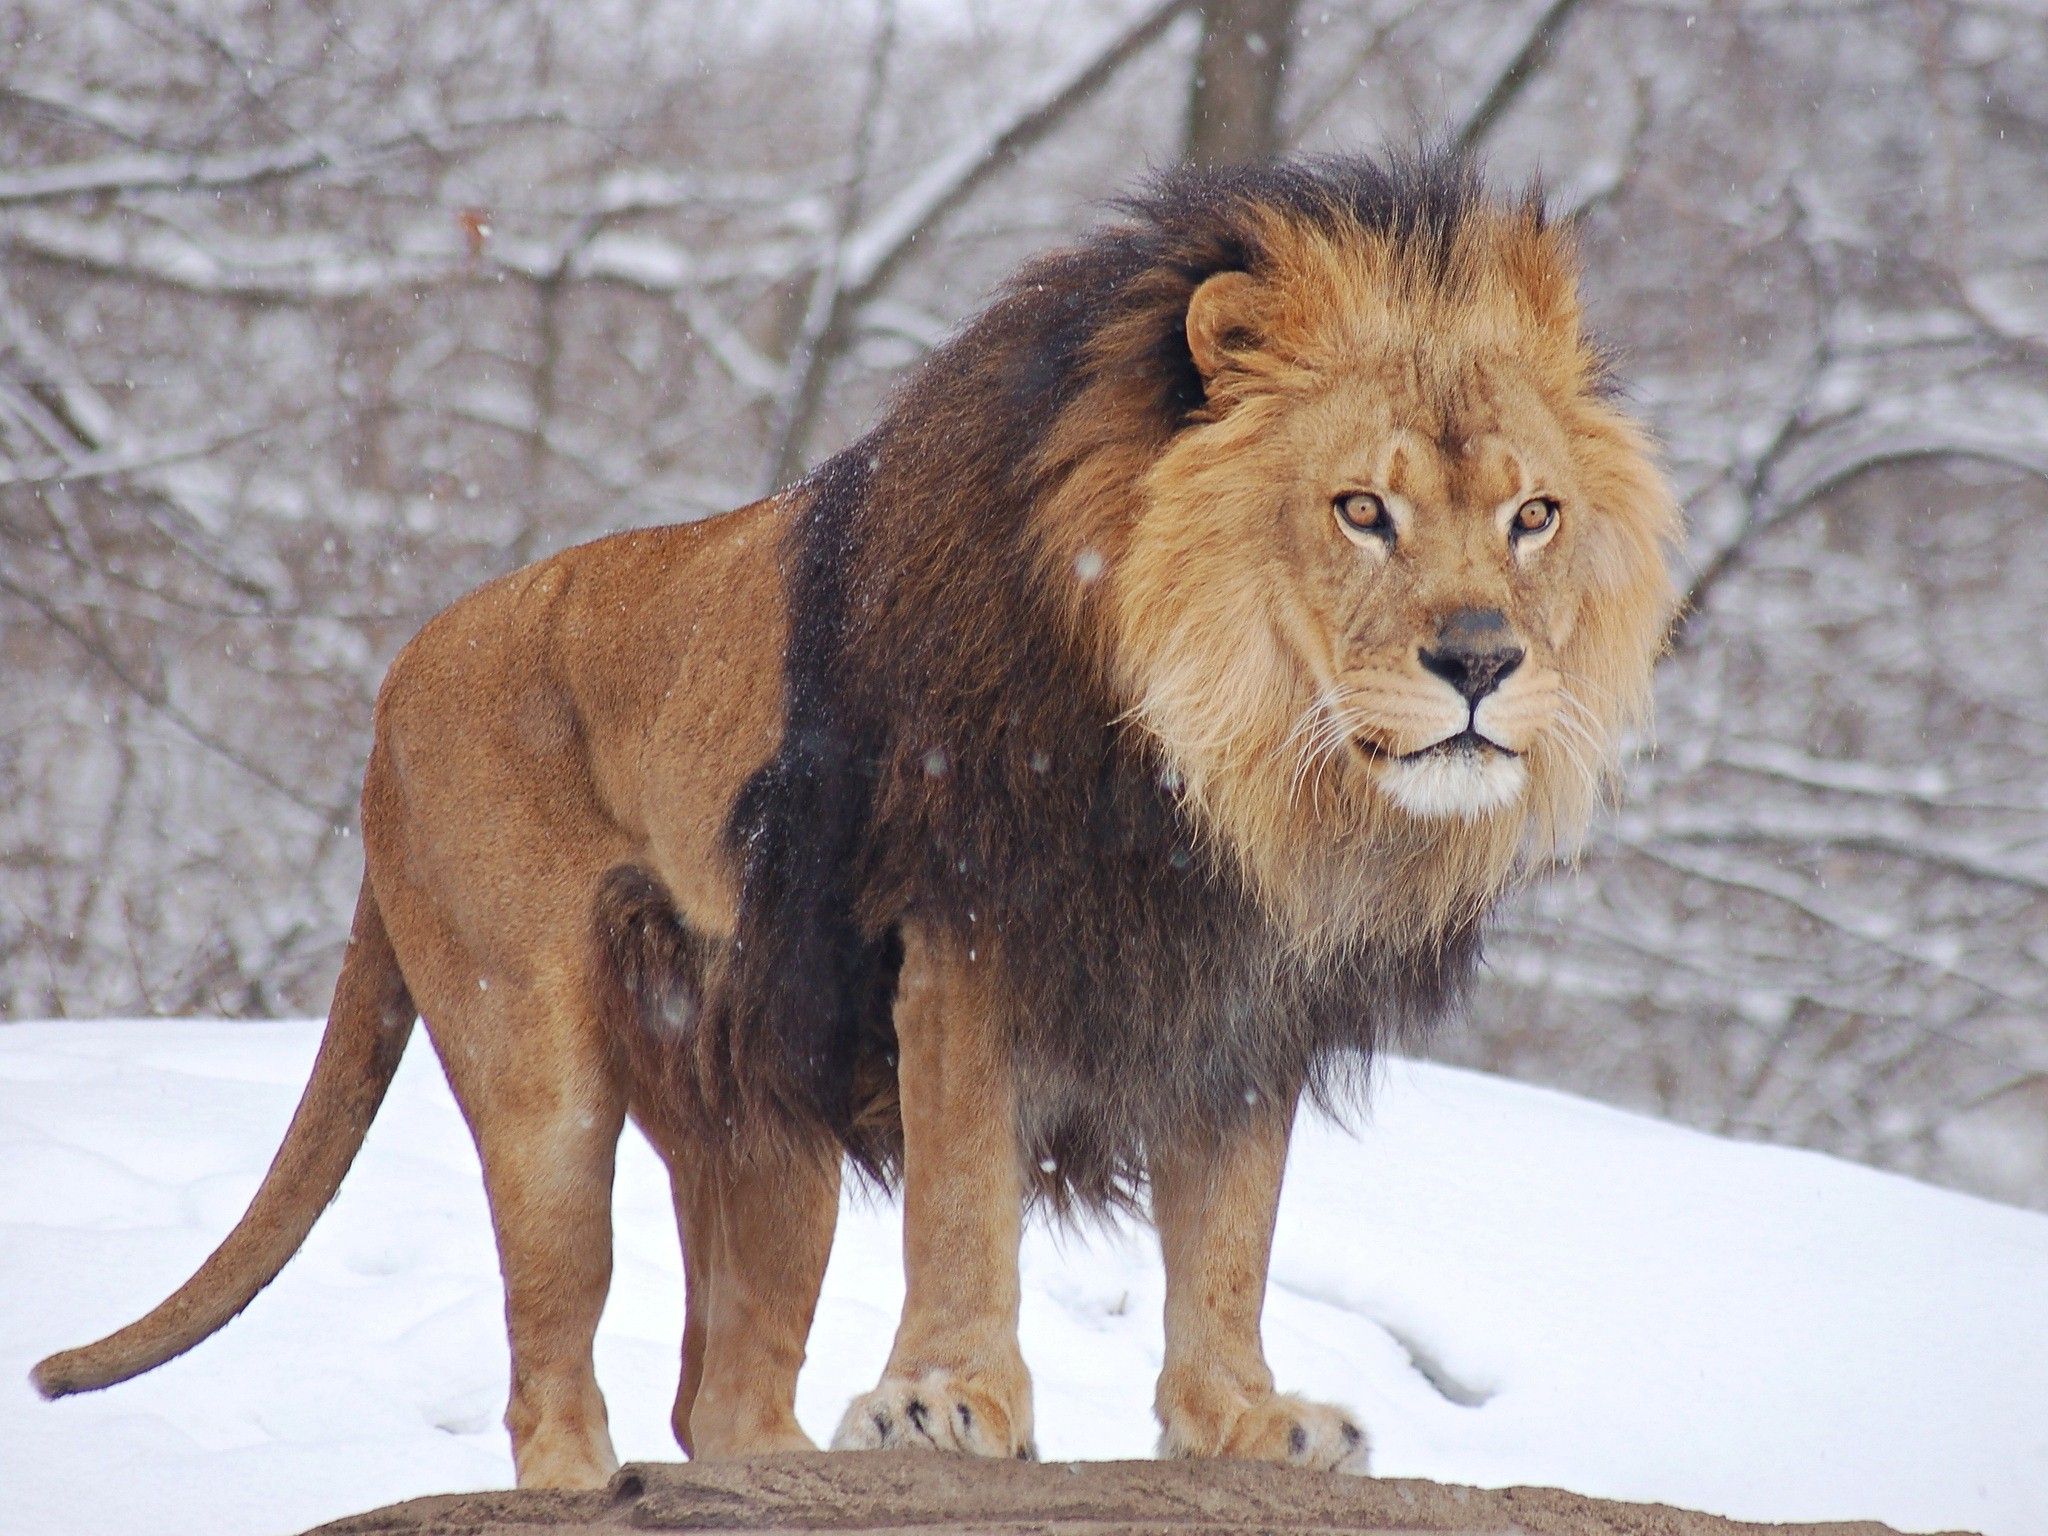 African lion walking in zoo photo hd famous wallpapers zoo photos animals scary animals